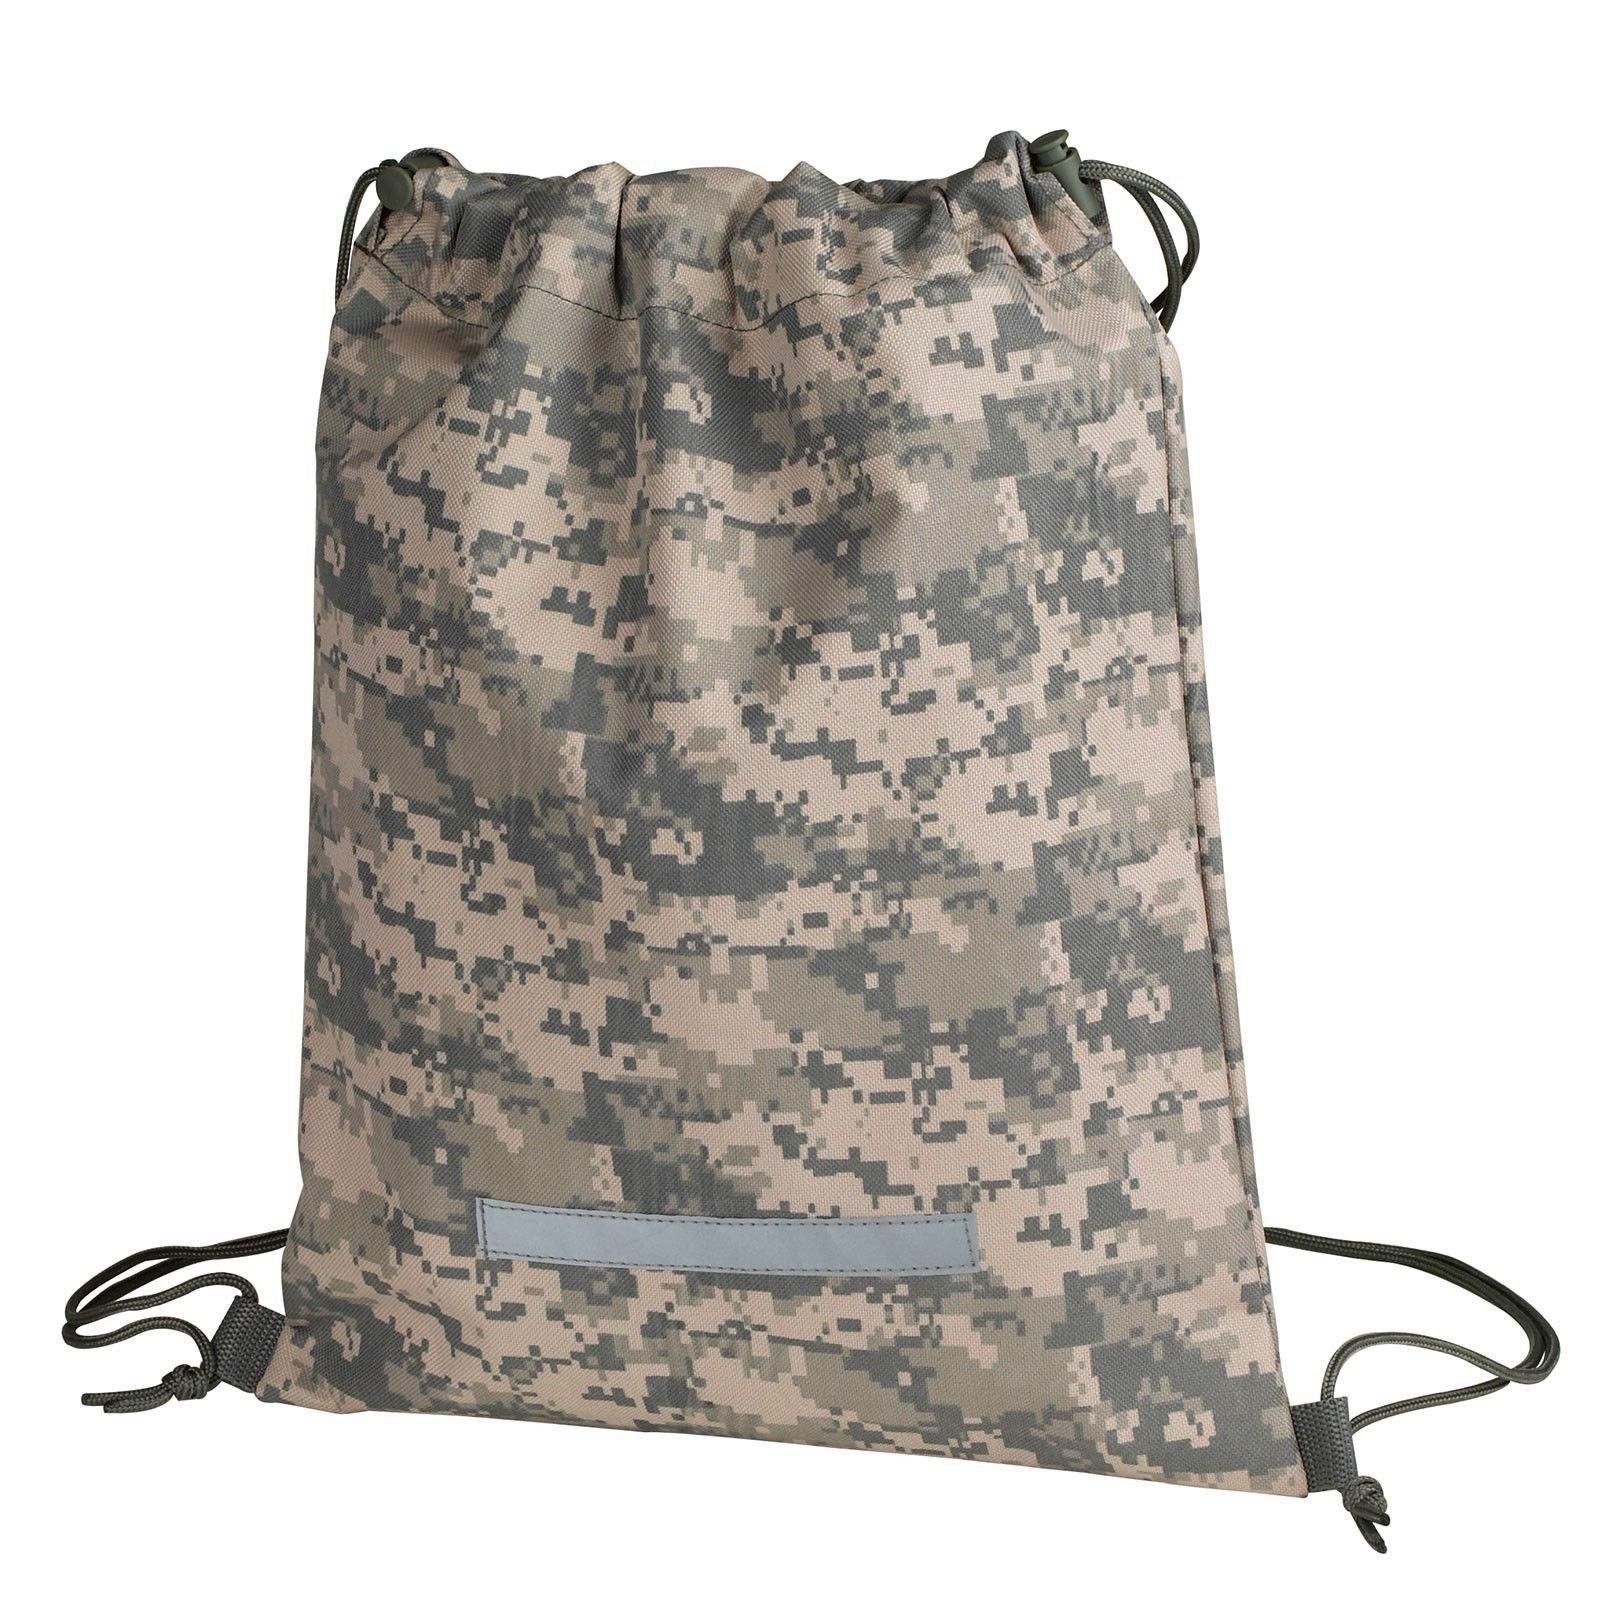 1 Dozen Drawstrings Bag Camo Camouflage Rucksack Backpack With Reflect